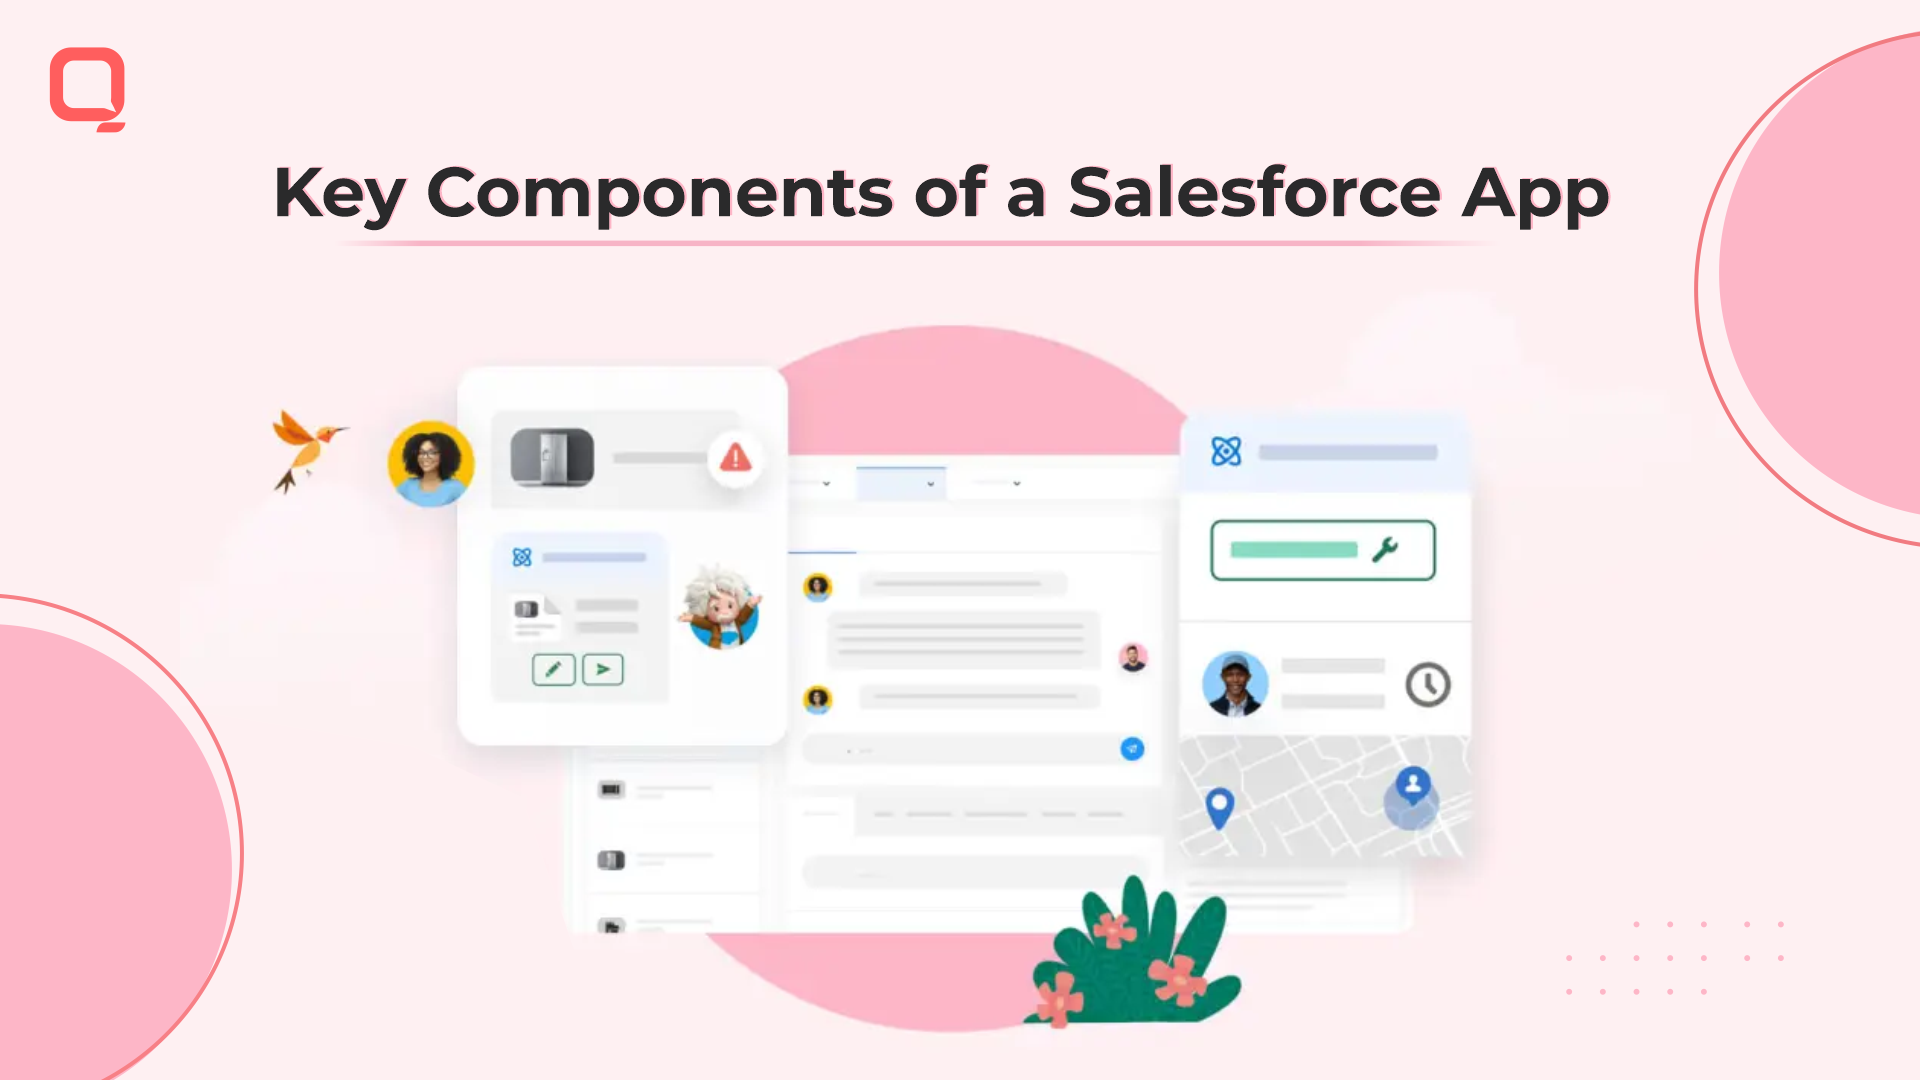 Components of a Salesforce